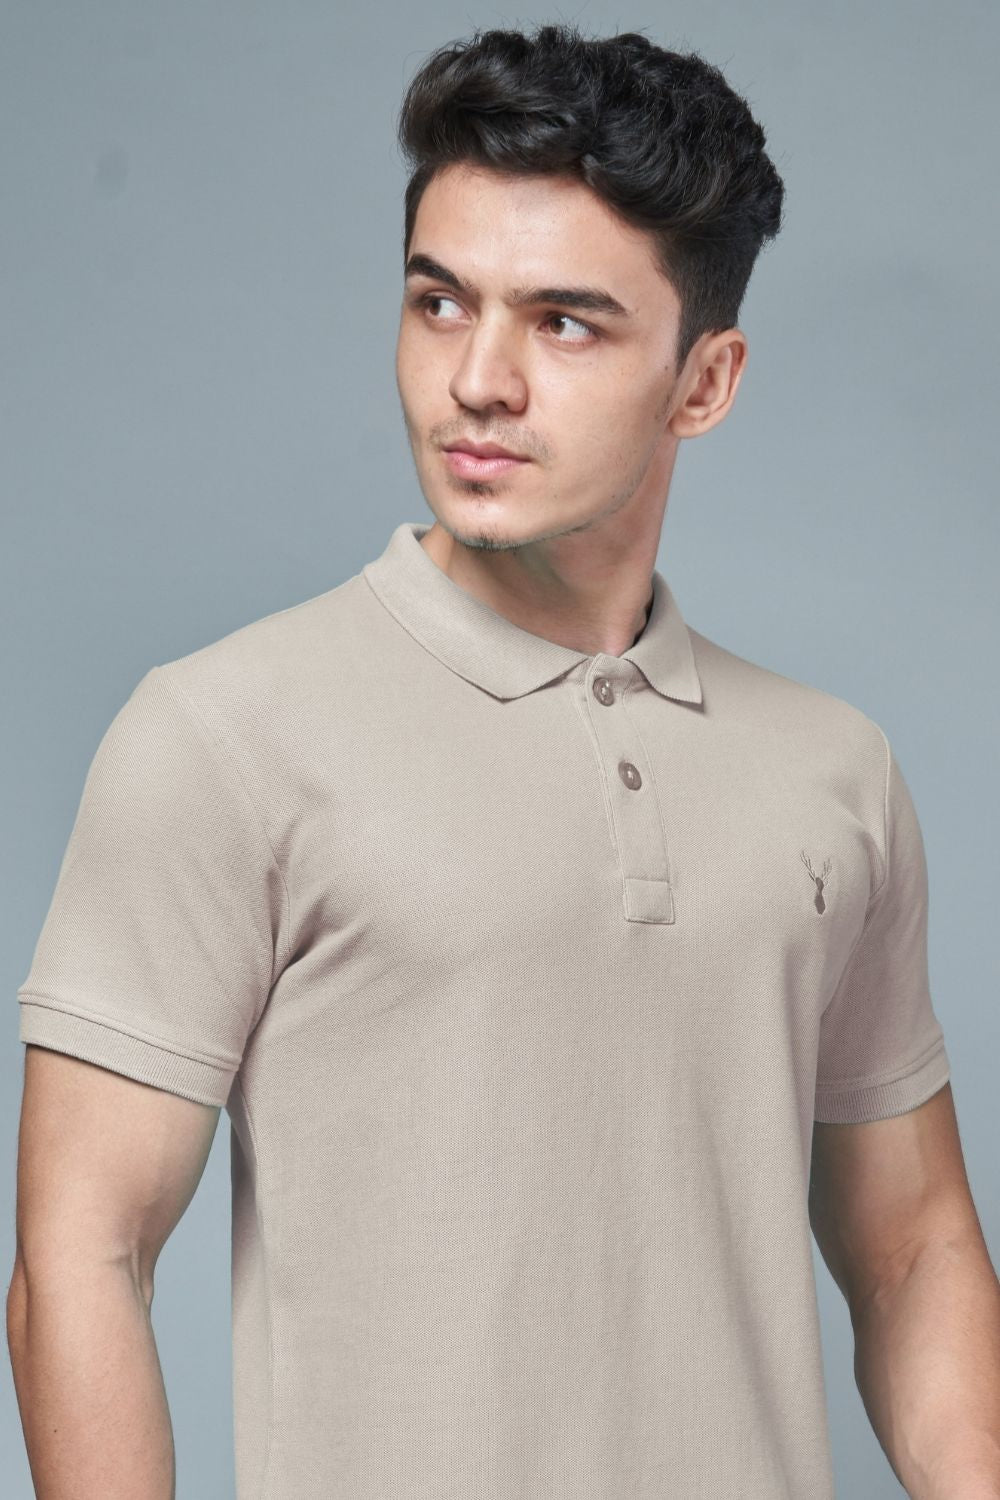 Moon light colored, identity Polo T-shirts for men with collar and half sleeves, close up.